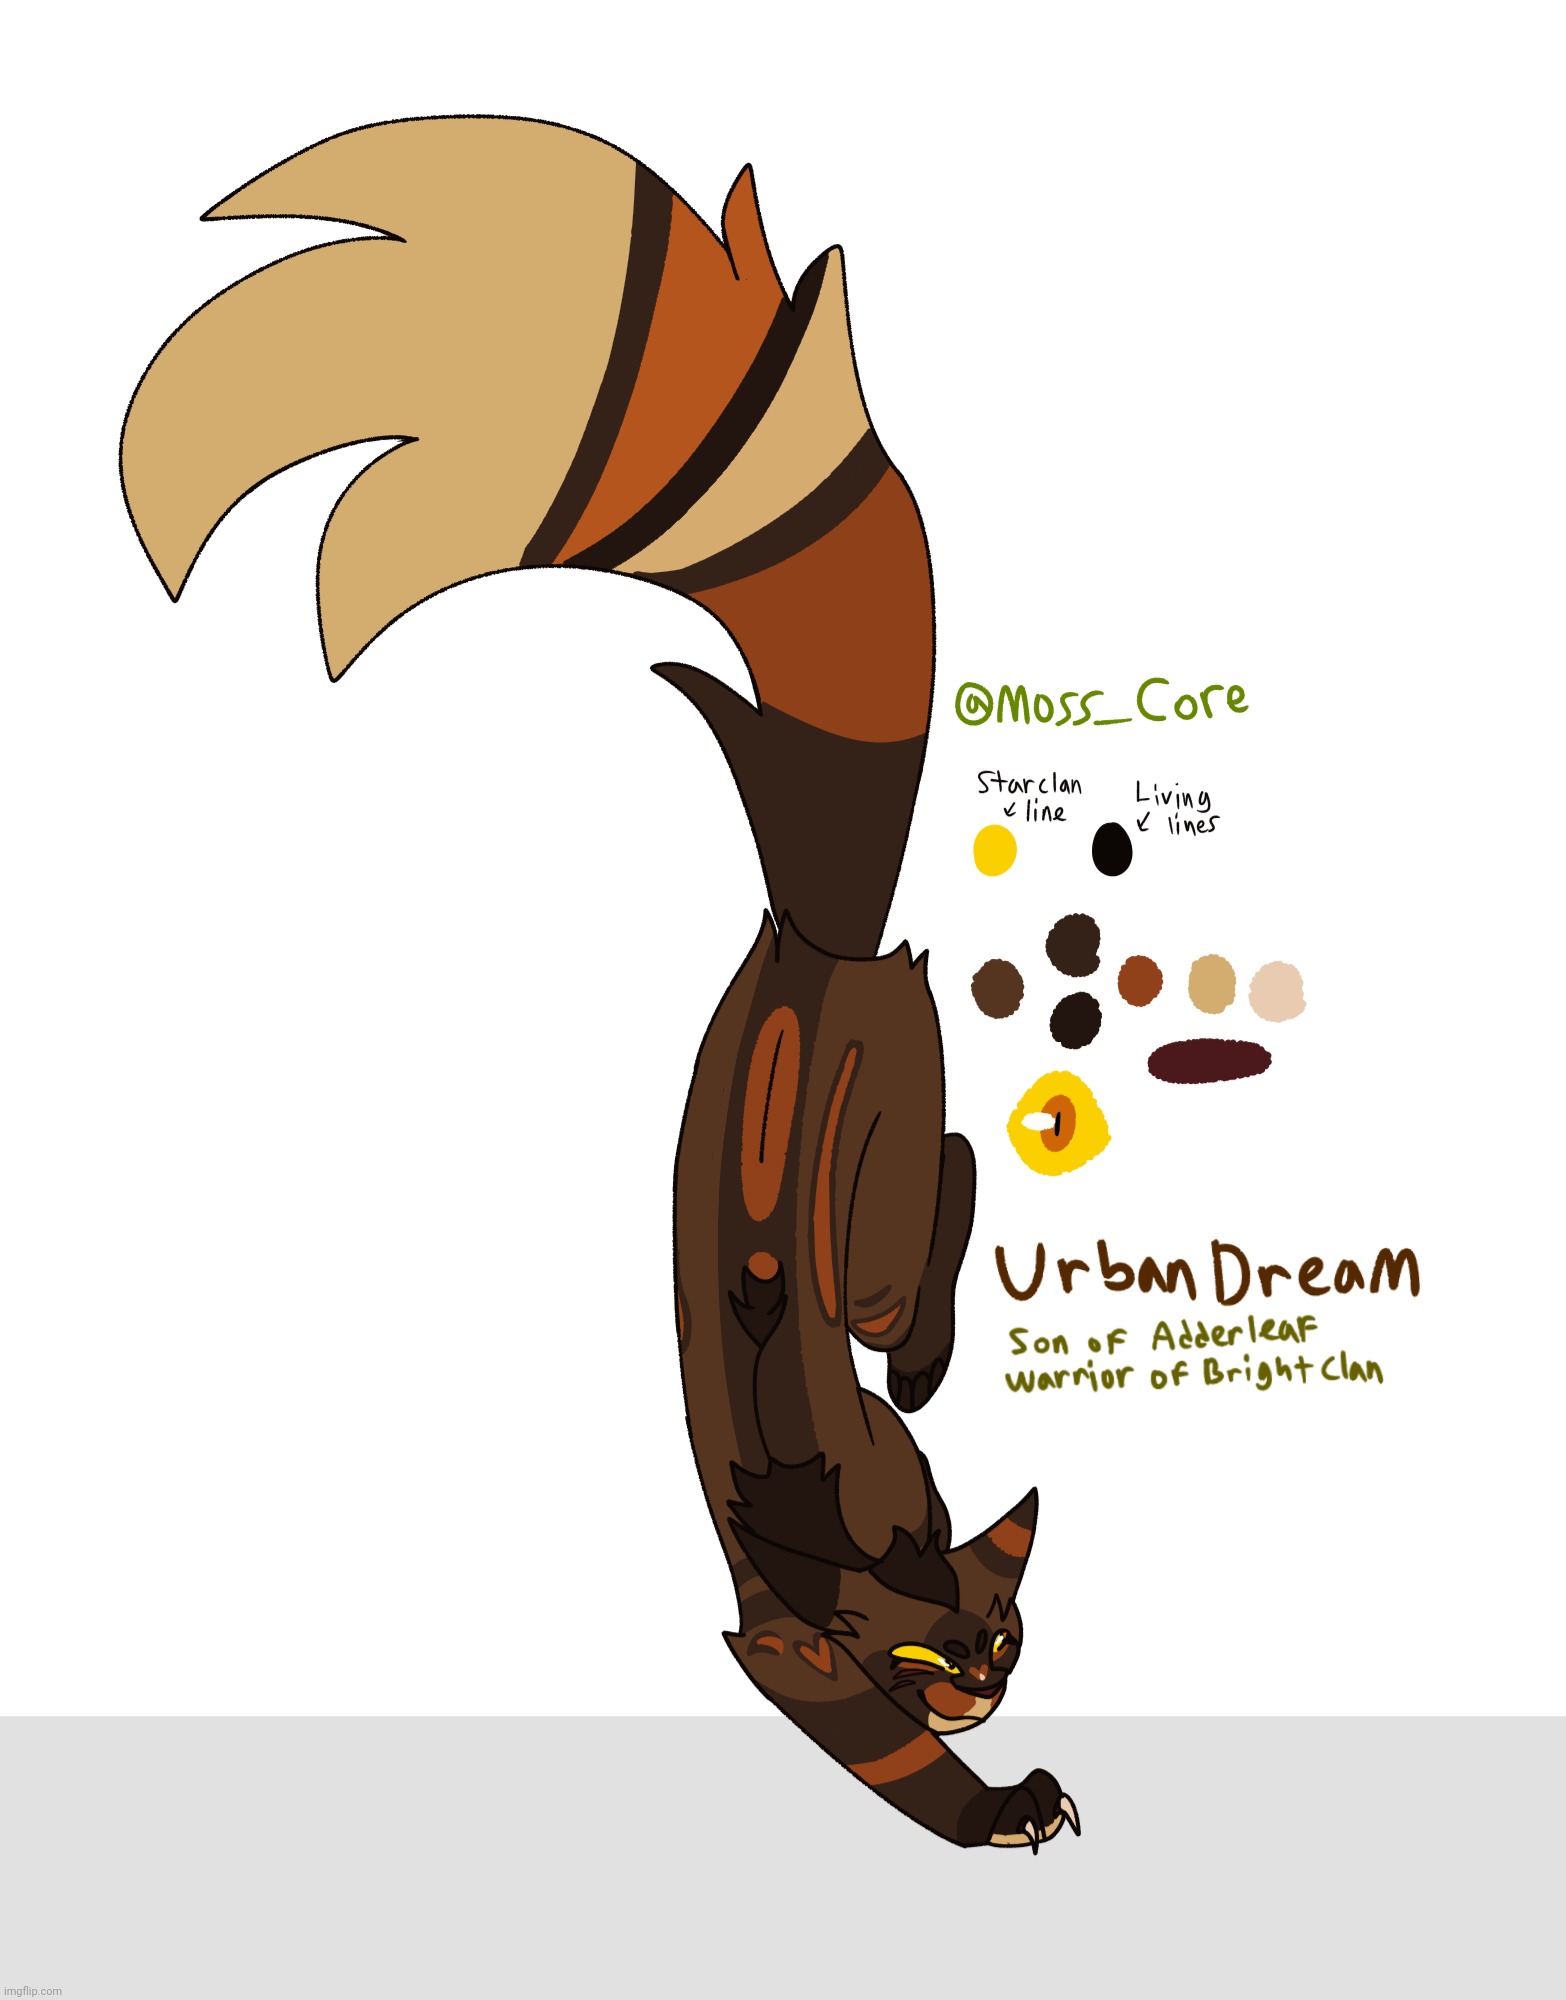 Urbandream! Chaotic dude who is the son of Brightclans first ever medic. | image tagged in urbandream,warrior cats,moss_core,urbandream from moss_core | made w/ Imgflip meme maker